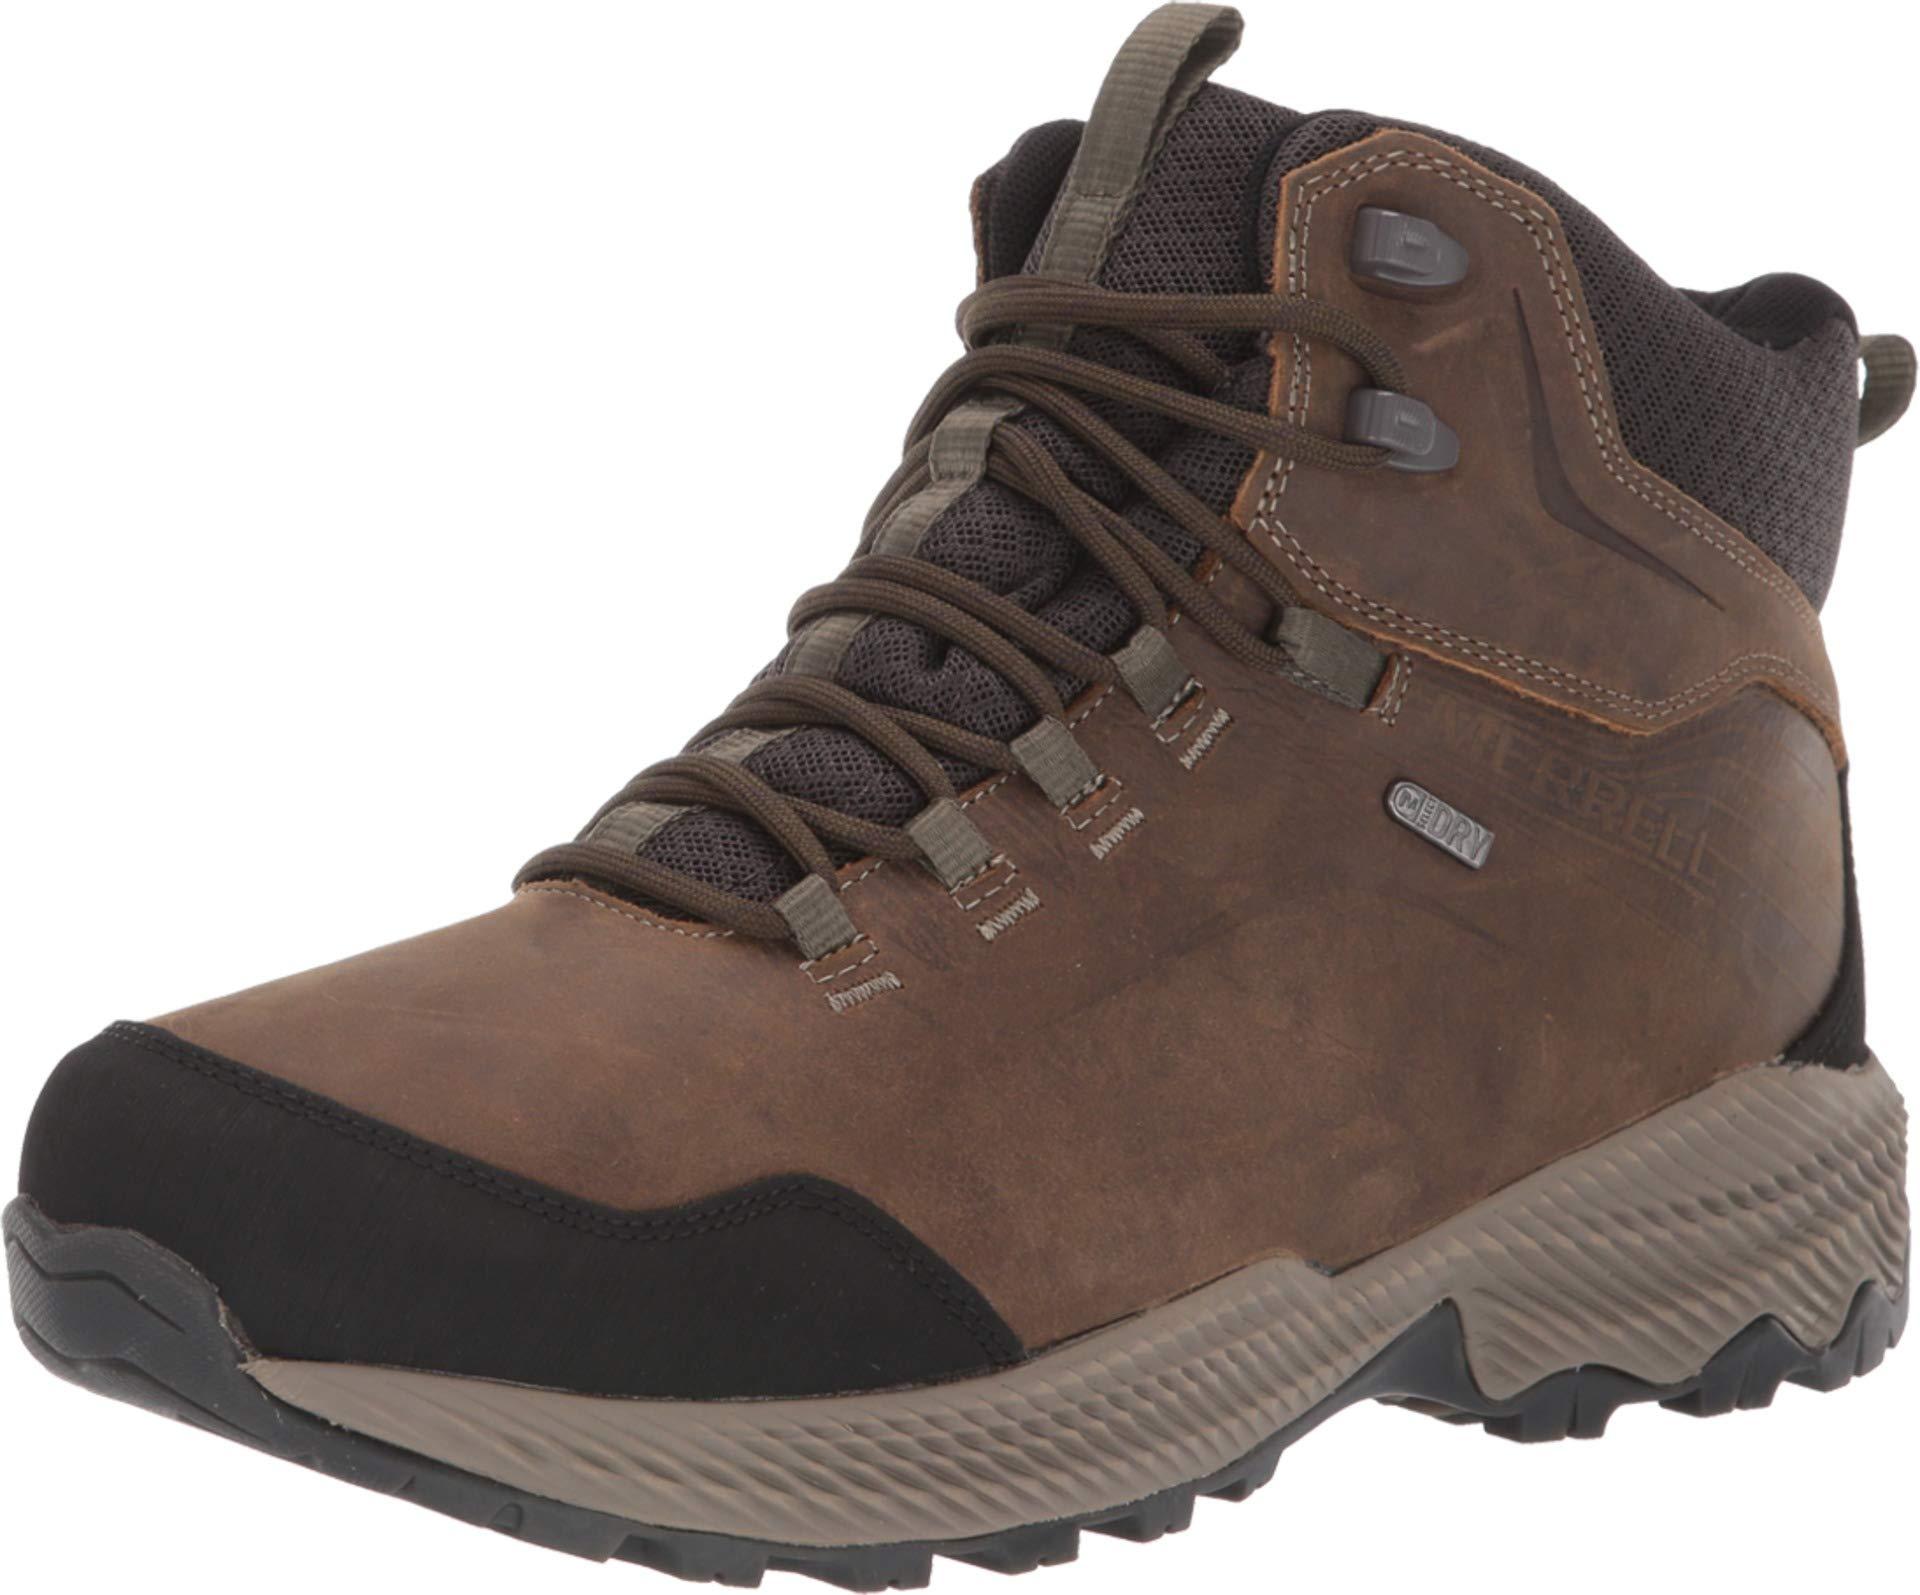 Merrell Leather Forestbound Mid Waterproof in Black for Men - Lyst